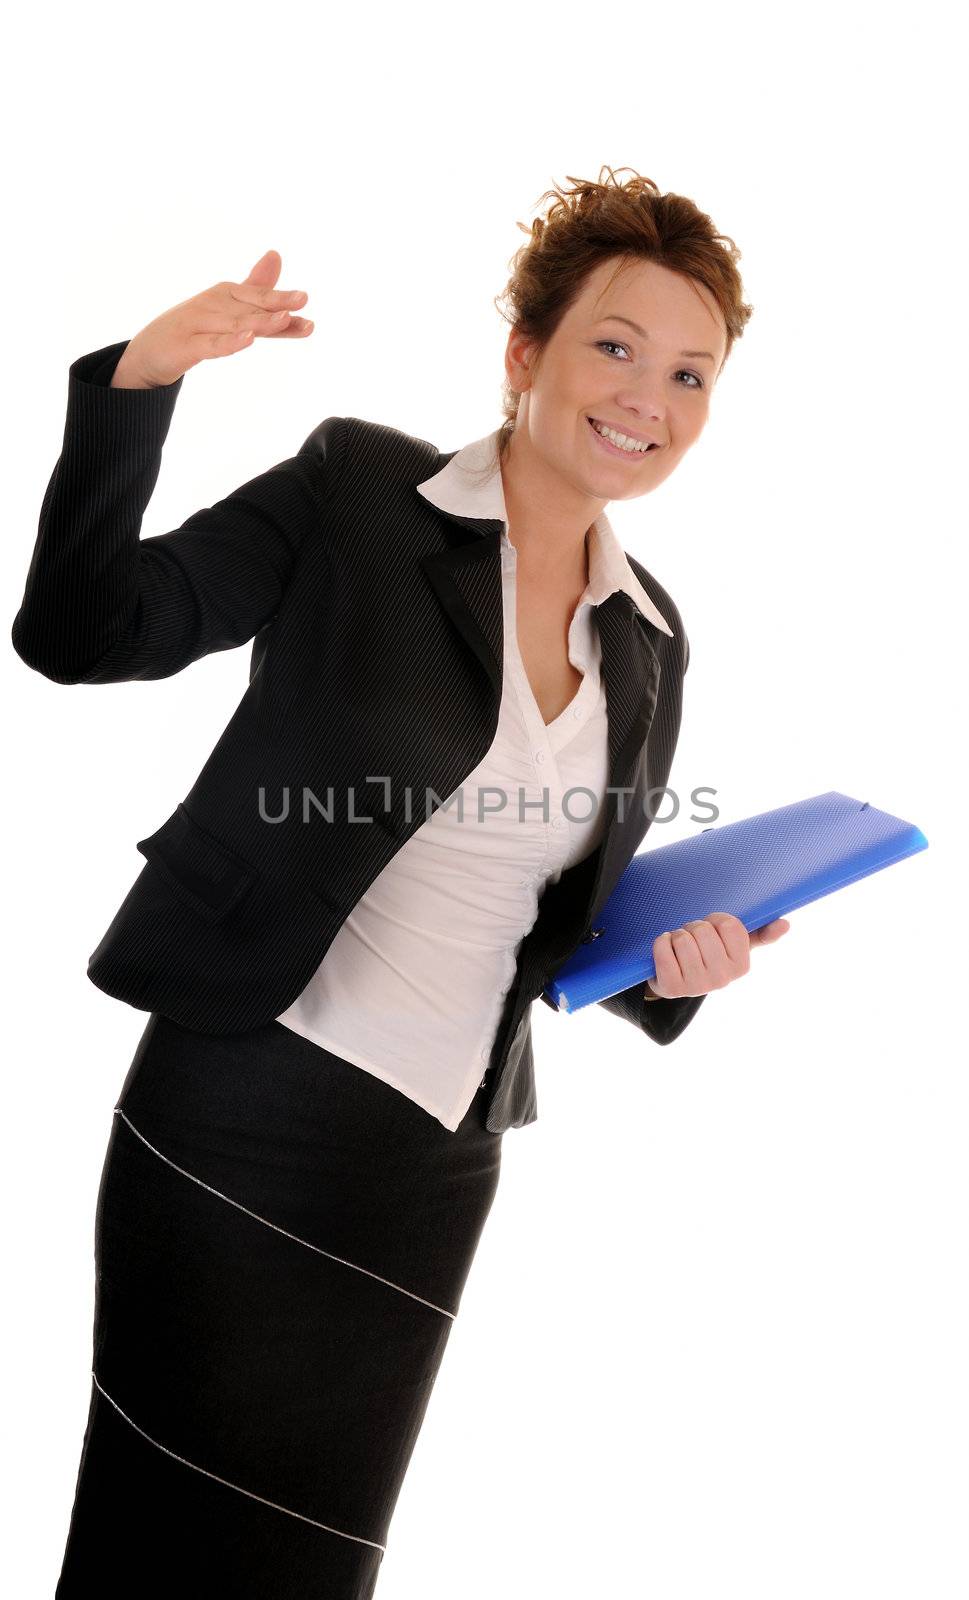 Atractive business woman with documents and invitation gesture on white background